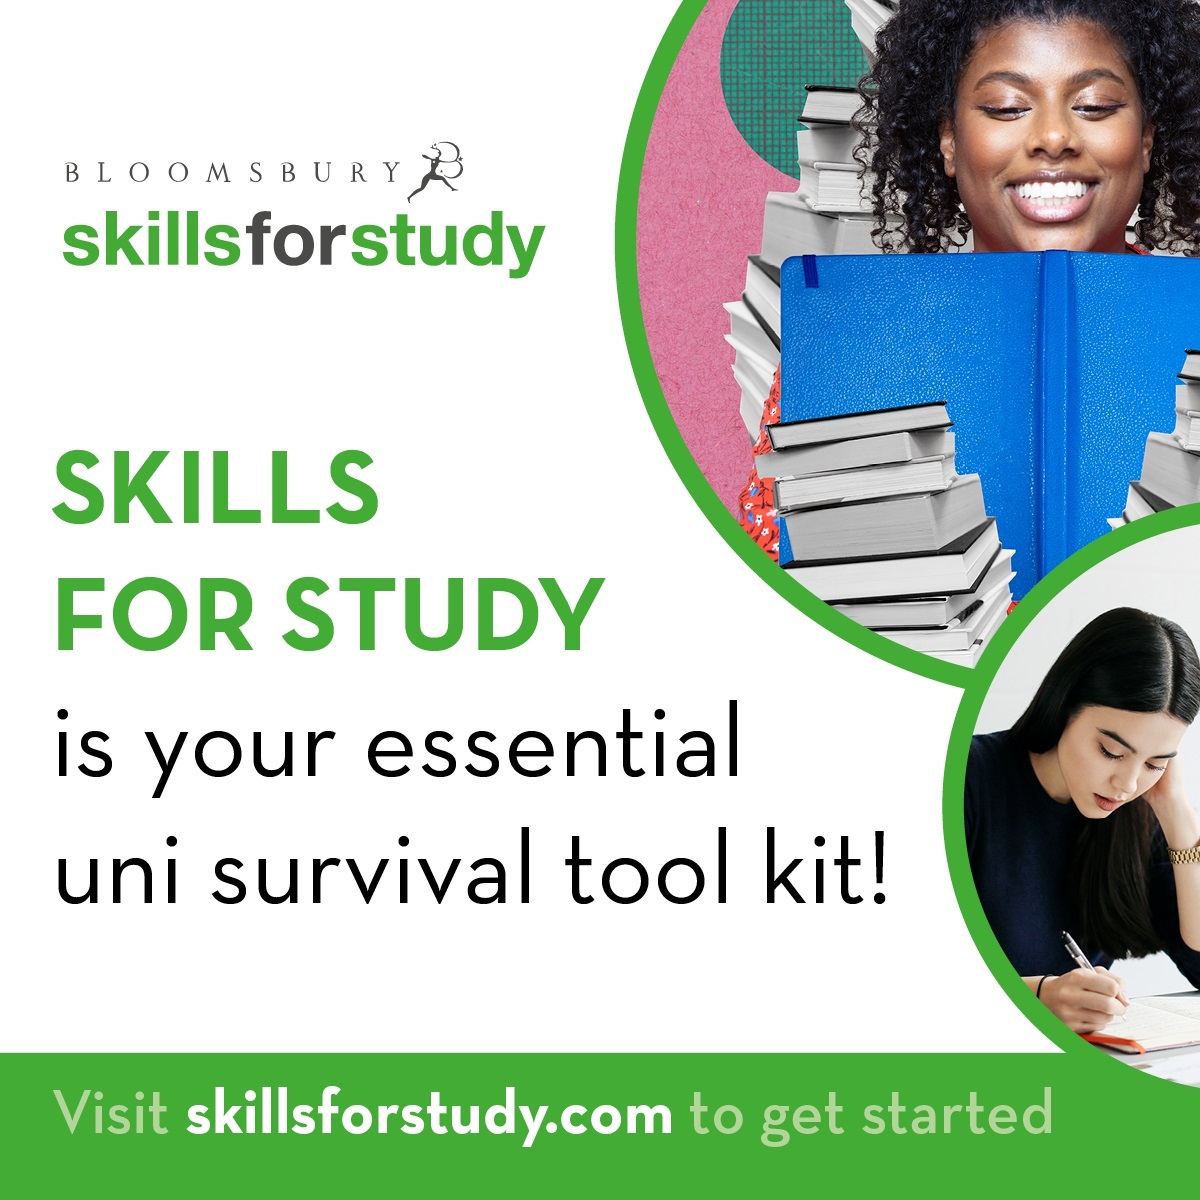 Skills for Study is your essential uni survival tool kit